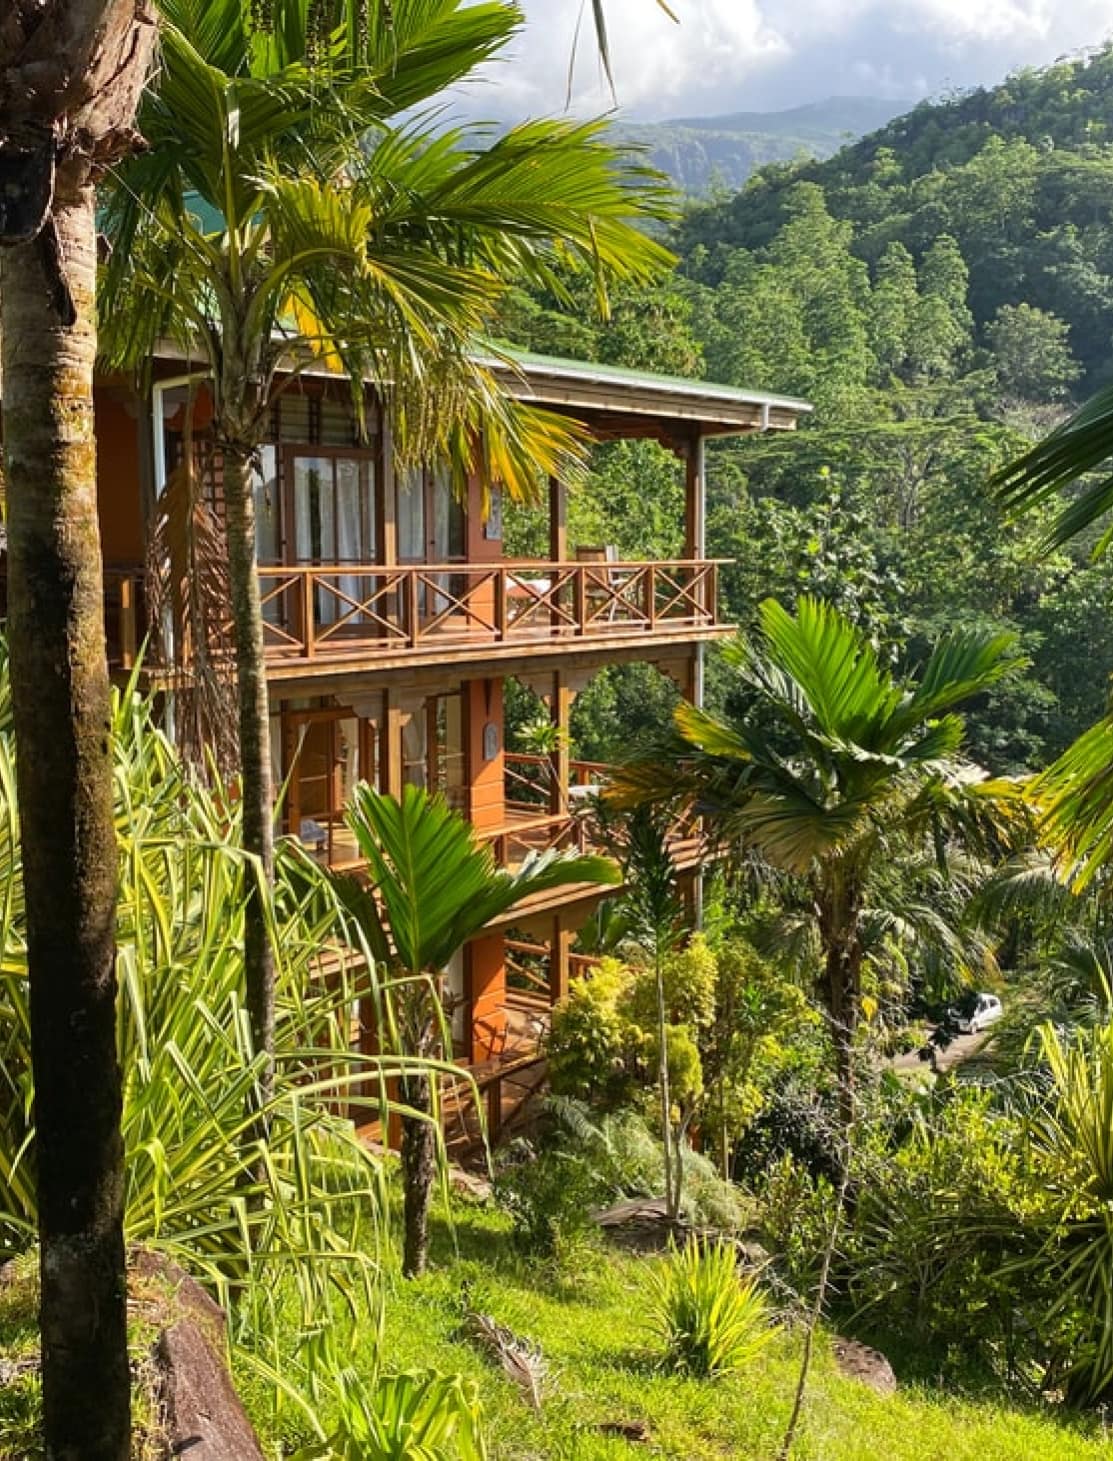 Spectacular accommodation sits amongst the trees of the Seychelles